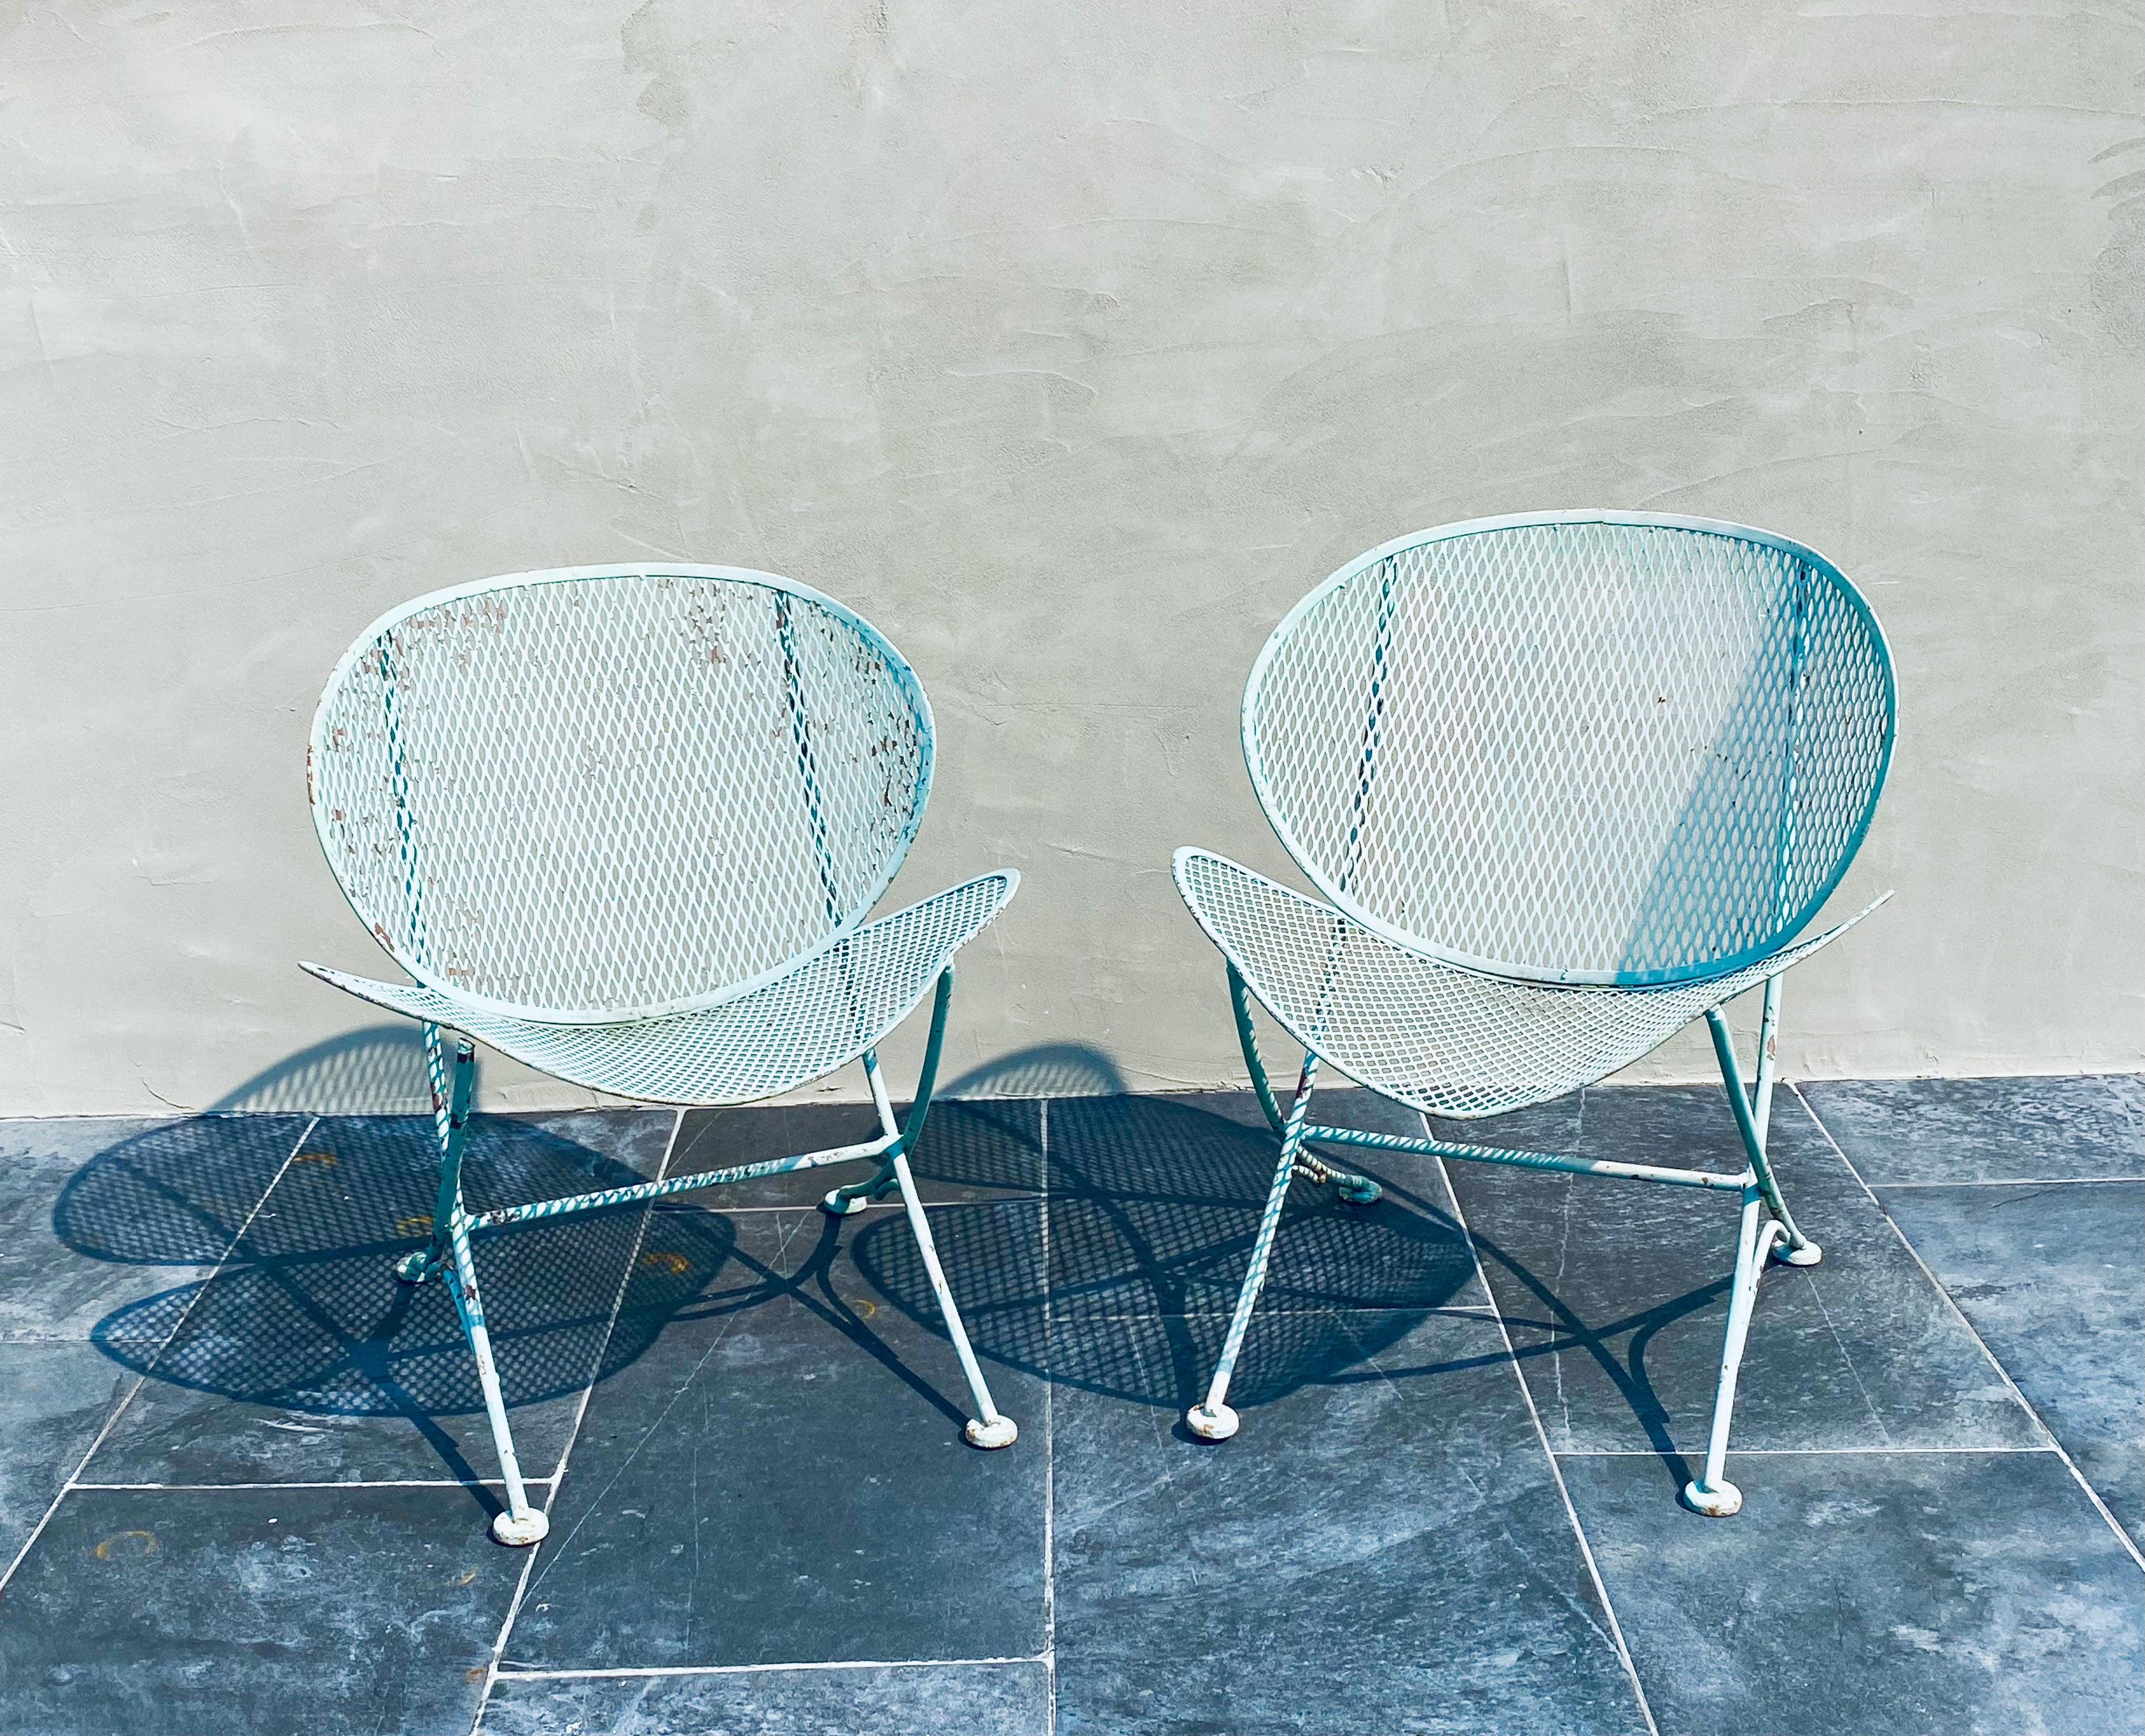 A Pair Clamshell Chairs by Maurizio Tempestini for John Salterini